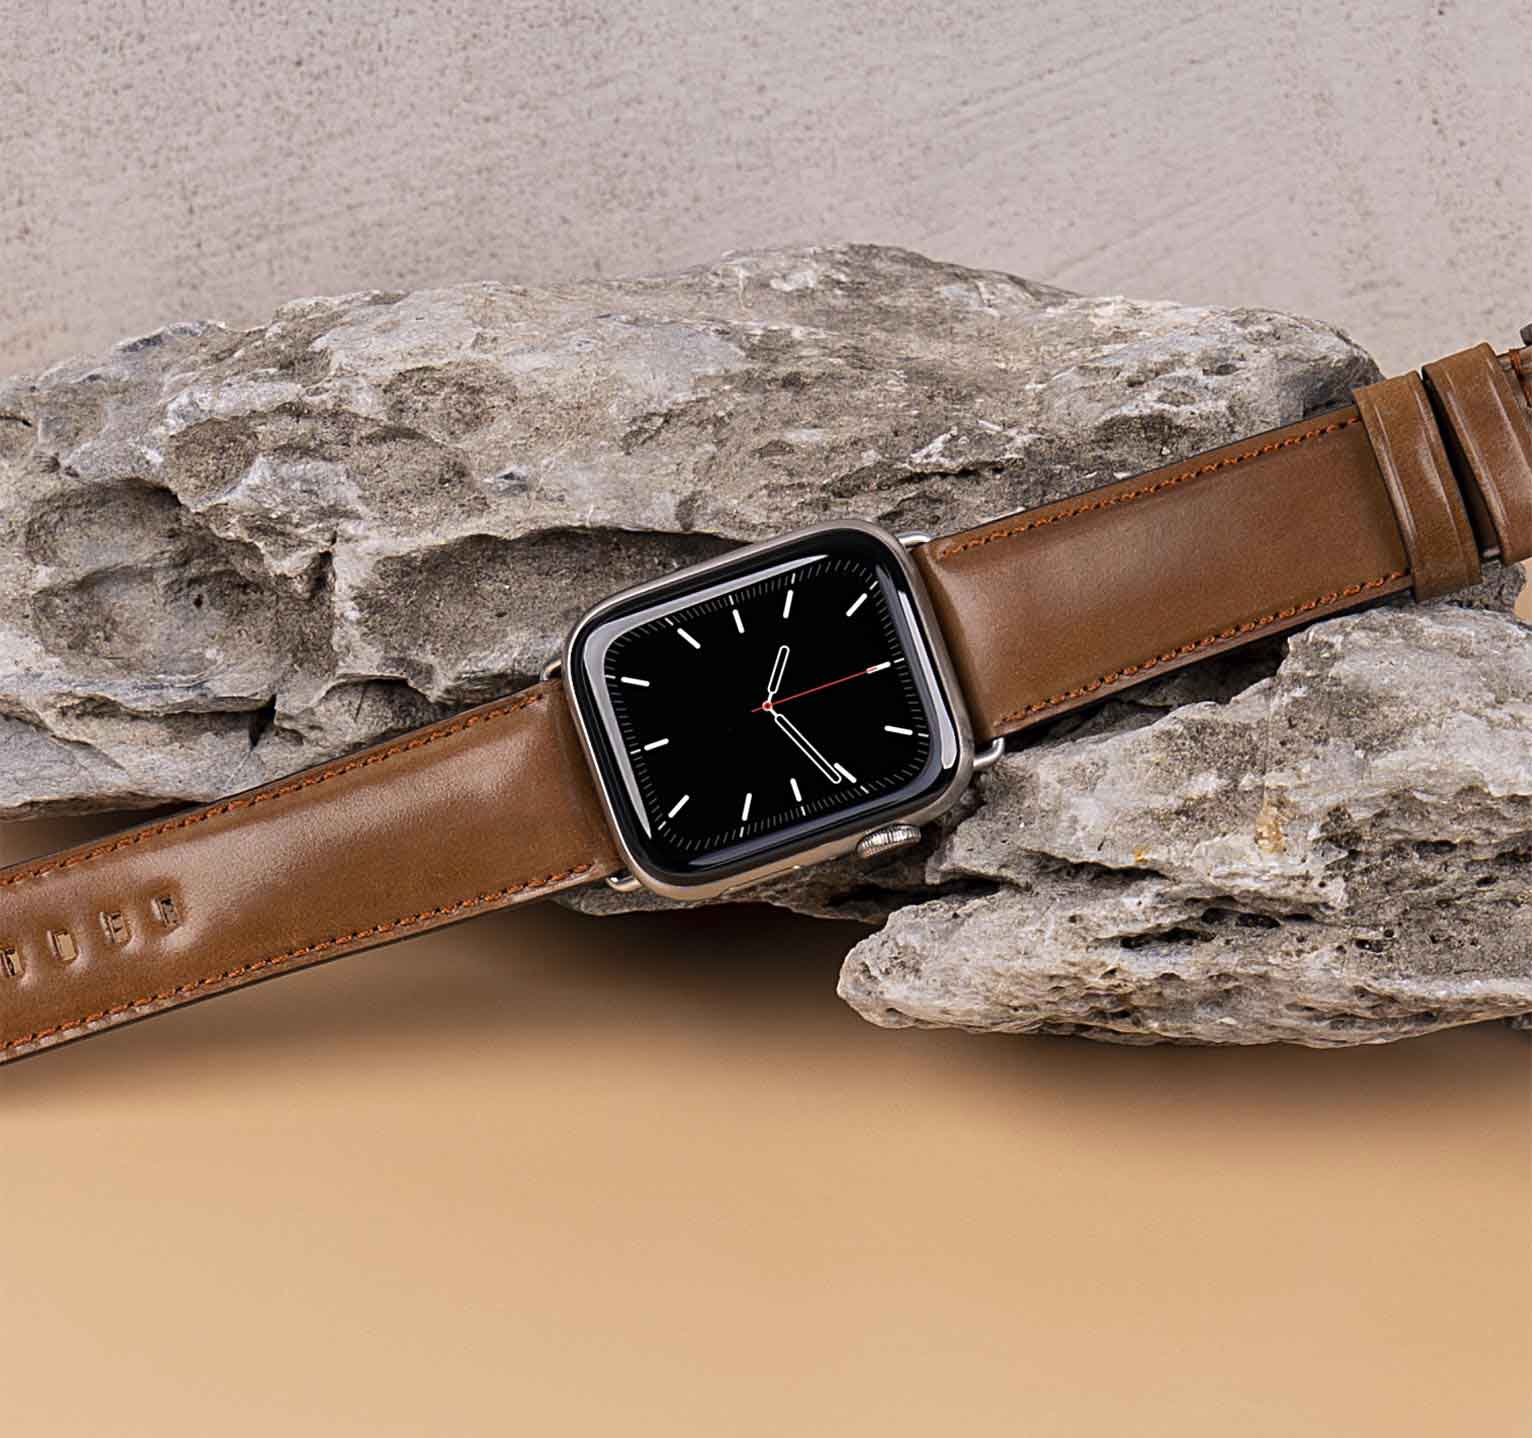 Leather Apple Watch Band - Natural Horween Shell Cordovan